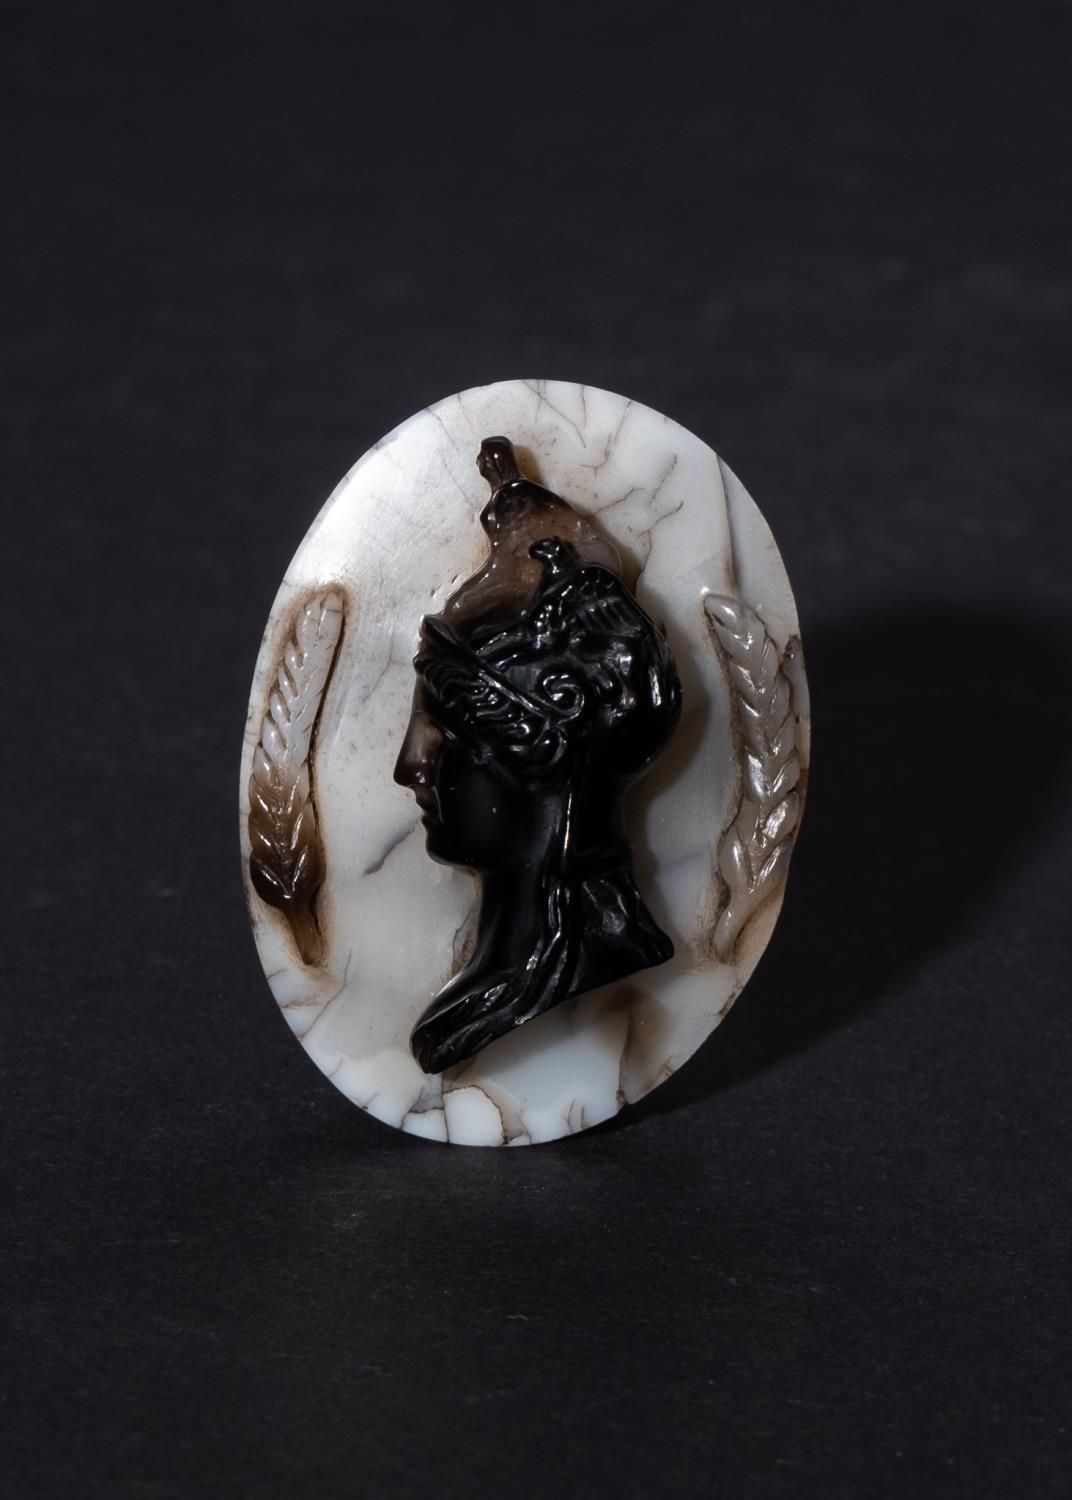 A BANDED AGATE CAMEO OF ATHENA, PTOLEMAIC PERIOD OR LATER CAMEO D'ATHENA EN AGAT&hellip;